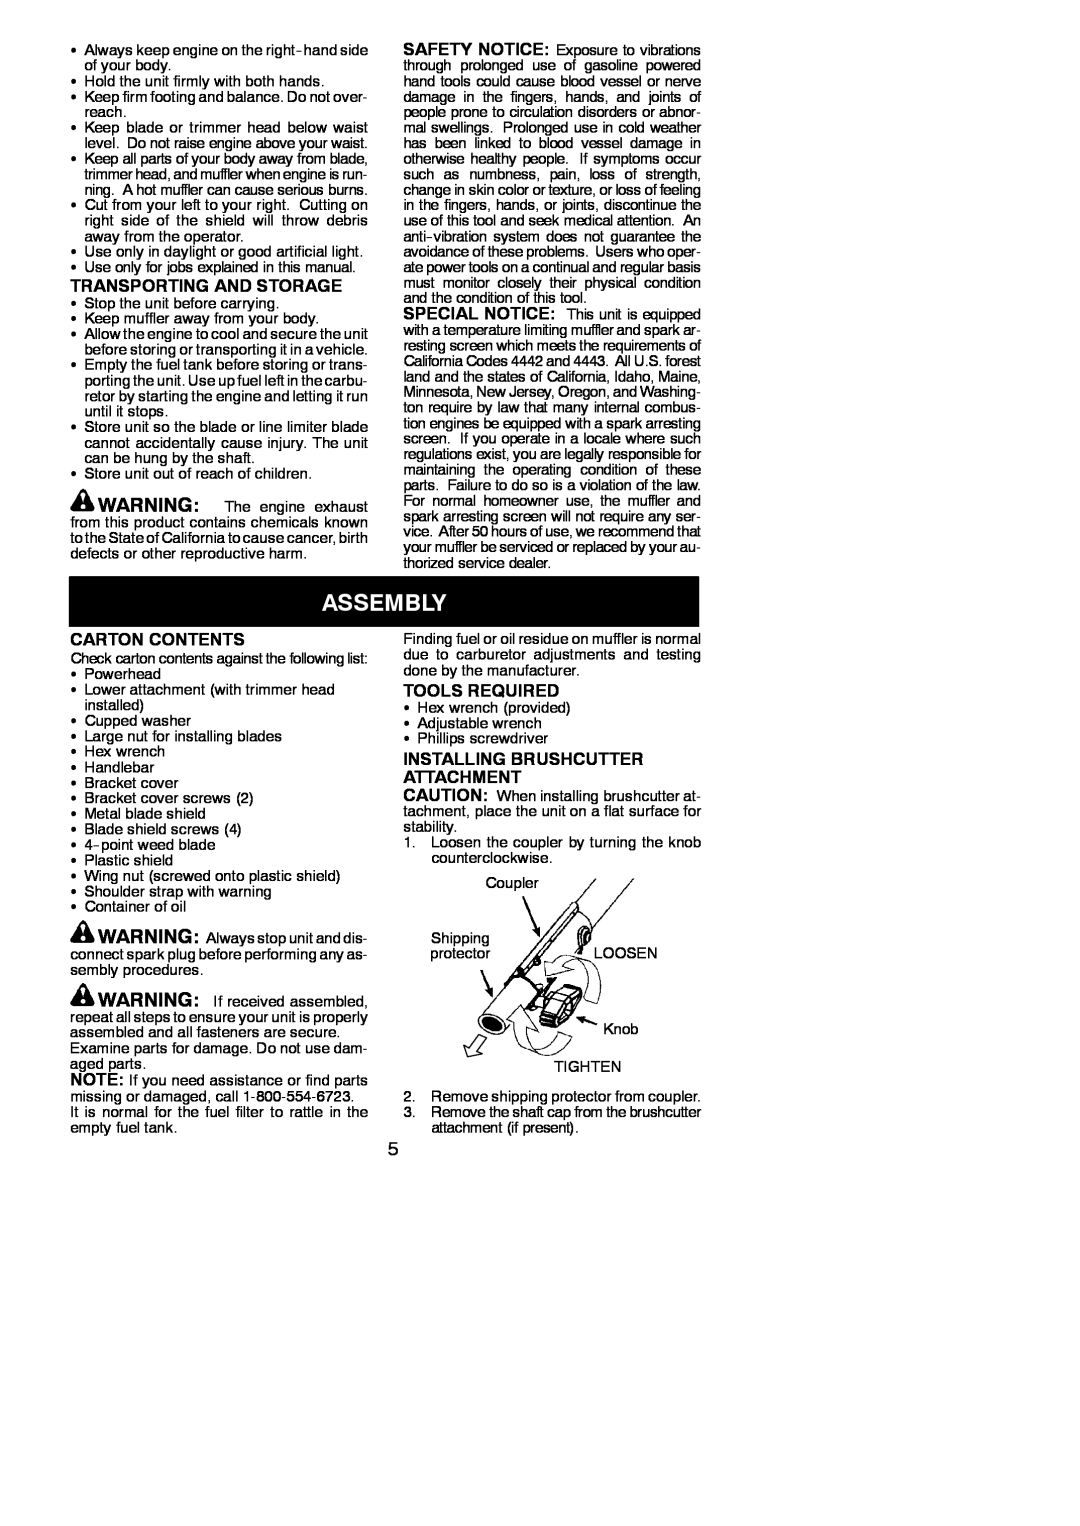 Poulan 952711880 Assembly, Transporting And Storage, Carton Contents, Tools Required, Installing Brushcutter Attachment 